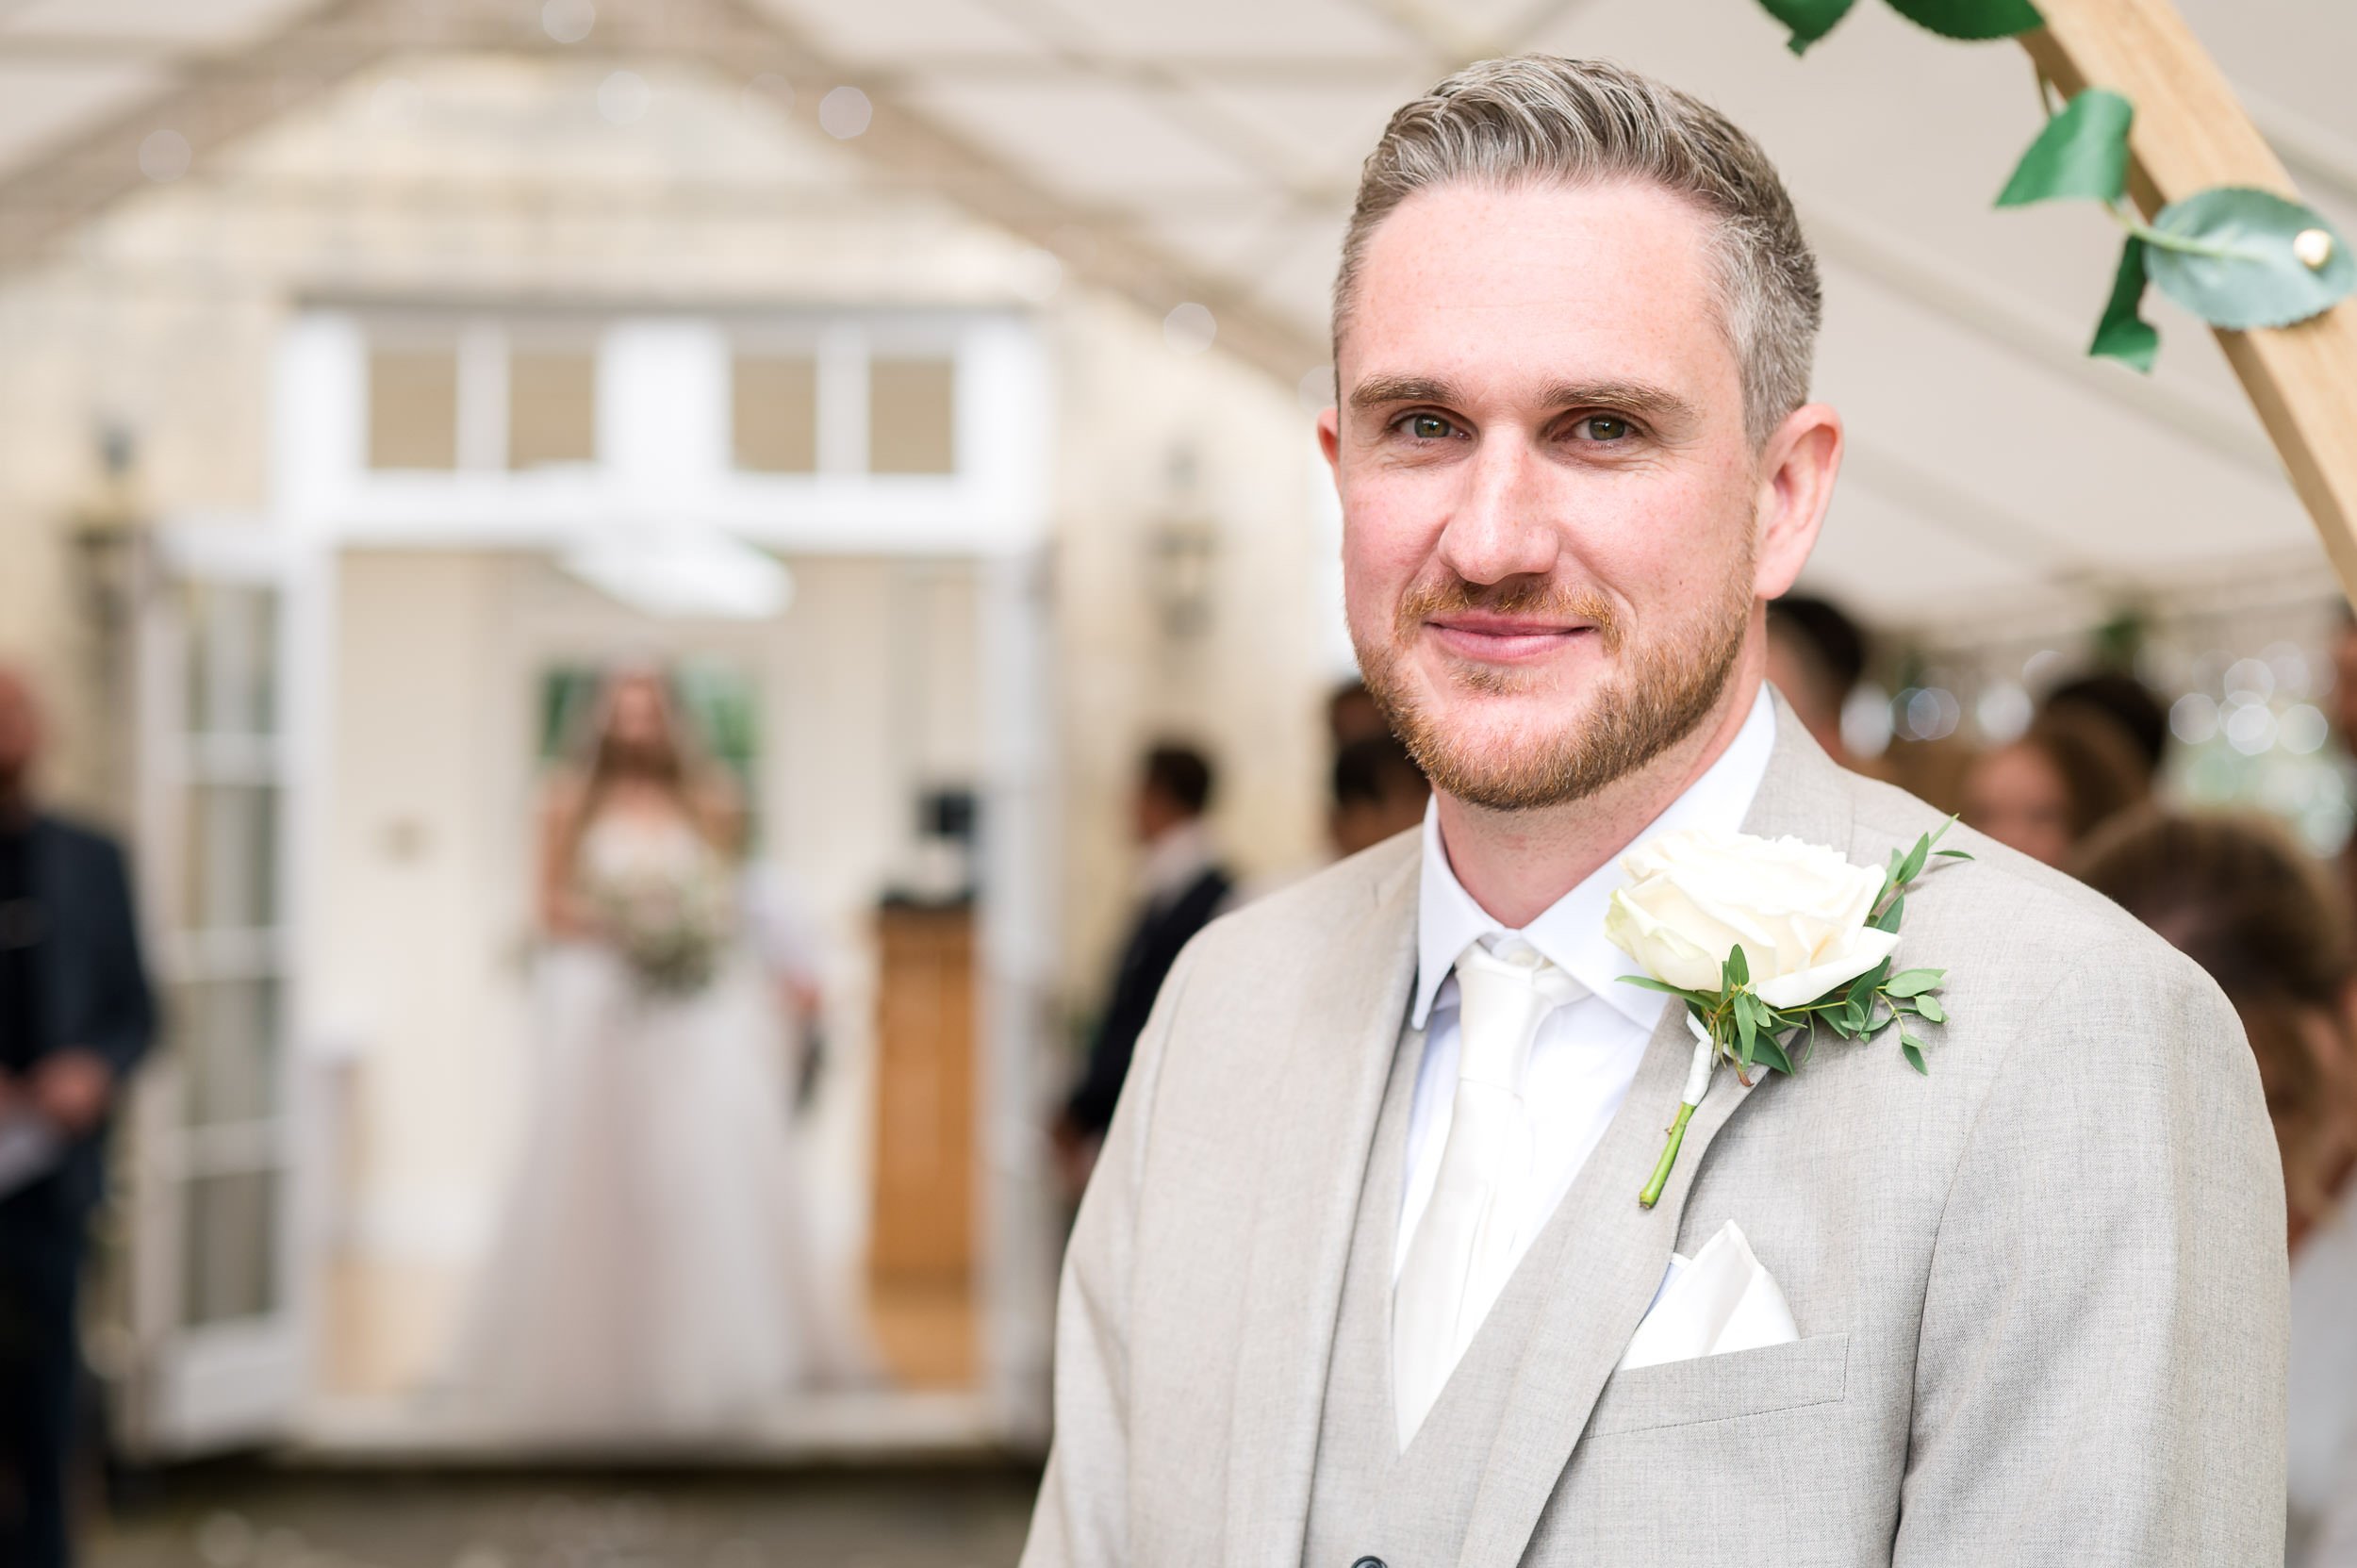 Groom takes a breath at Hethfelton House wedding before he turns to see his bride walk the aisle